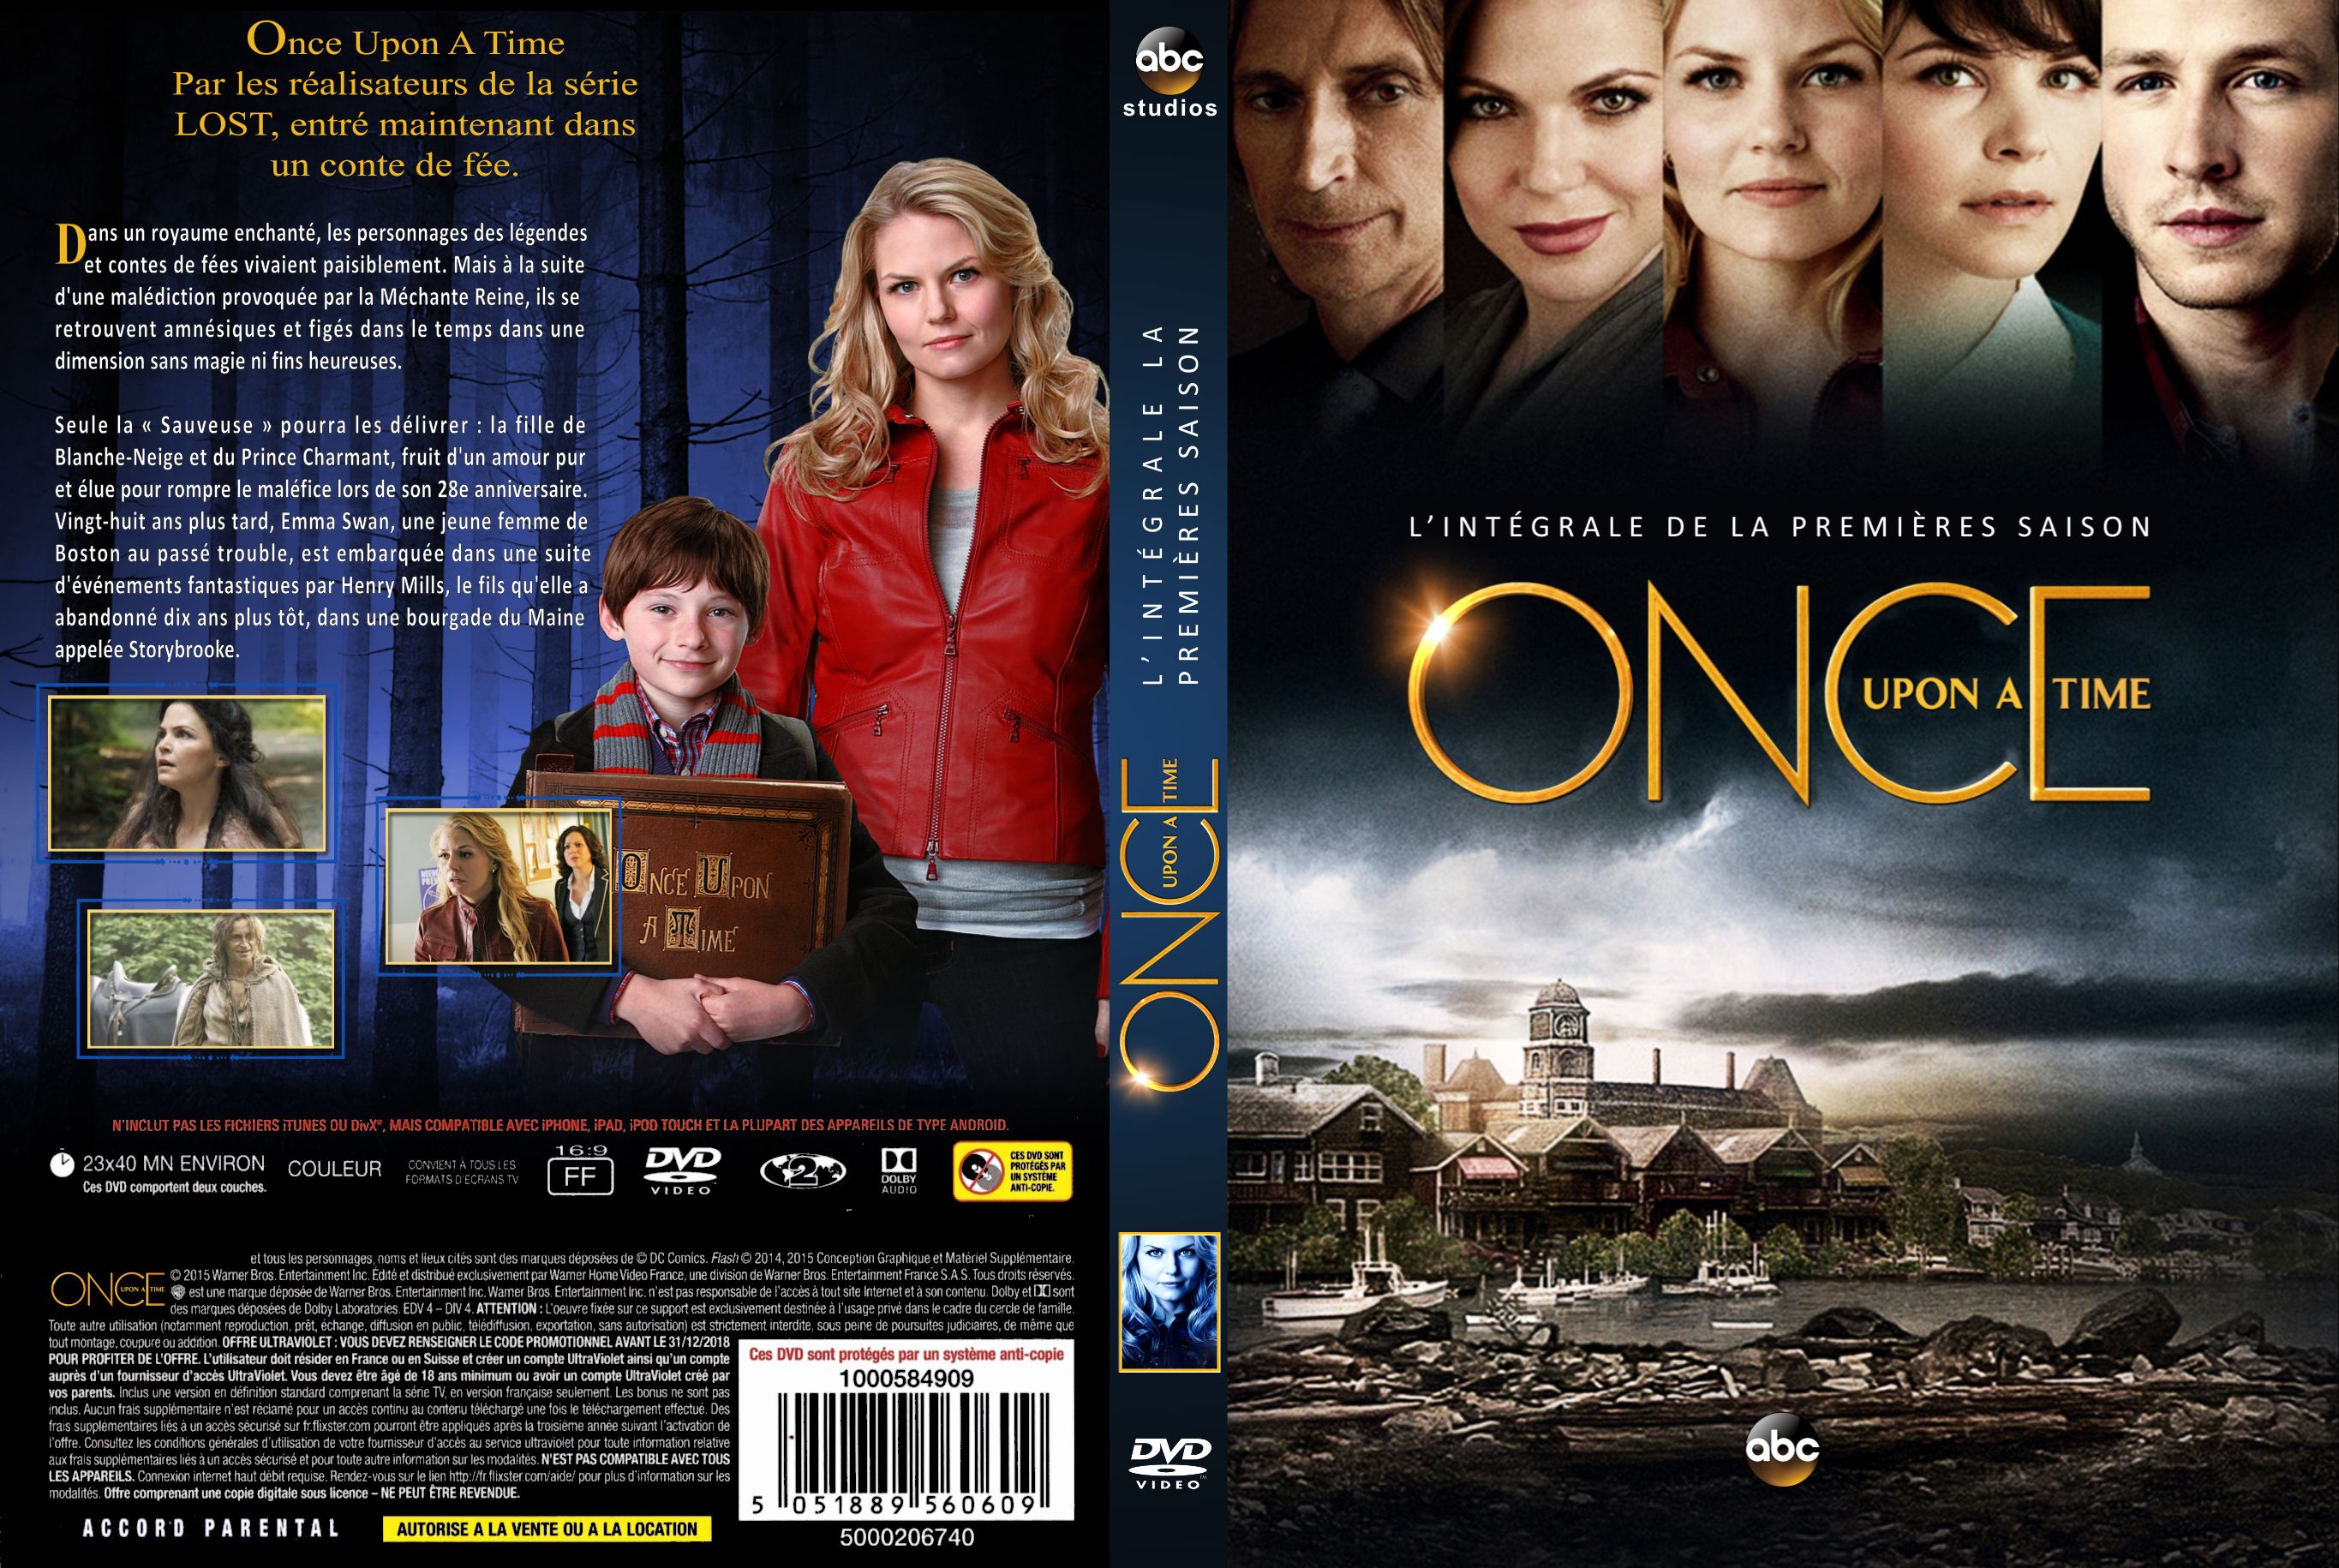 Jaquette DVD Once Upon a Time saison 1 custom